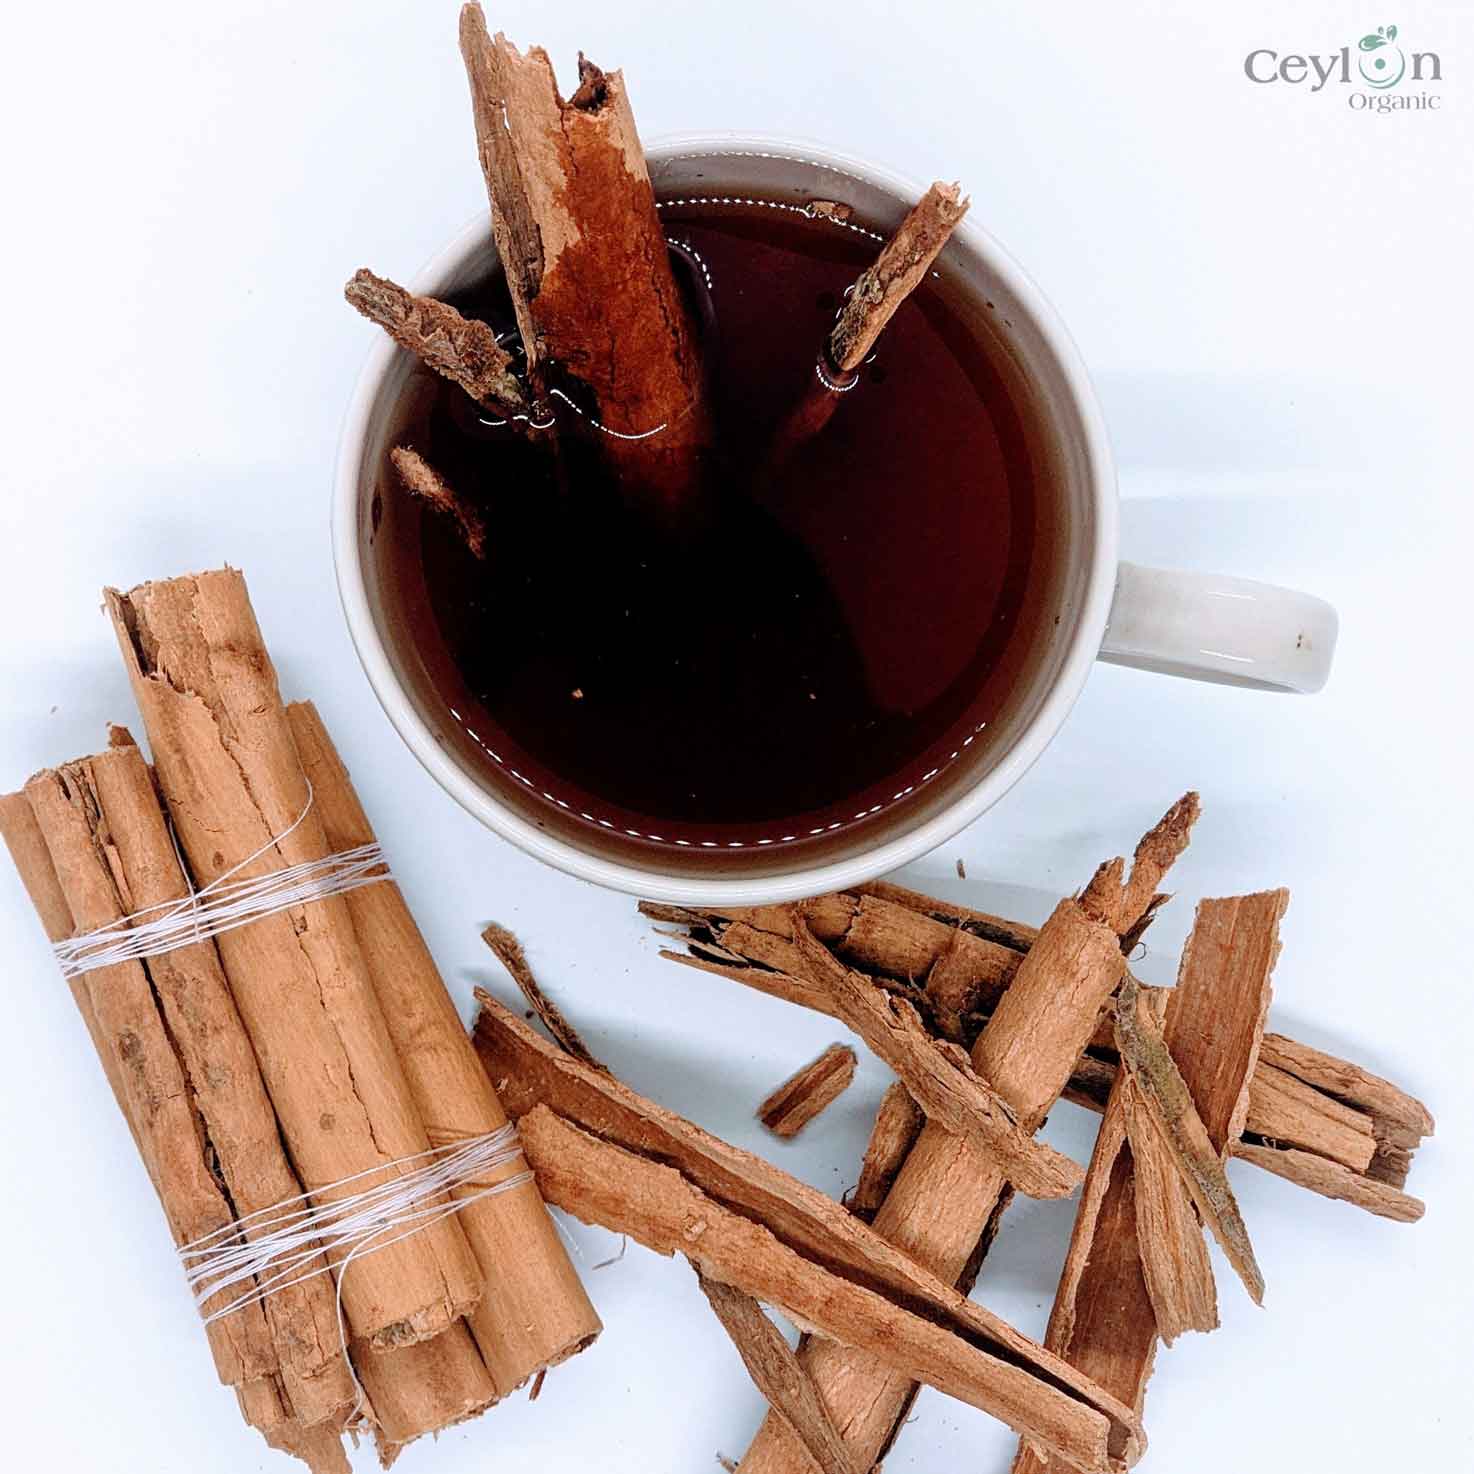 2kg+ Cinnamon Sticks - The Perfect Spice for Baking, Cooking, and Tea | Ceylon Organic-7